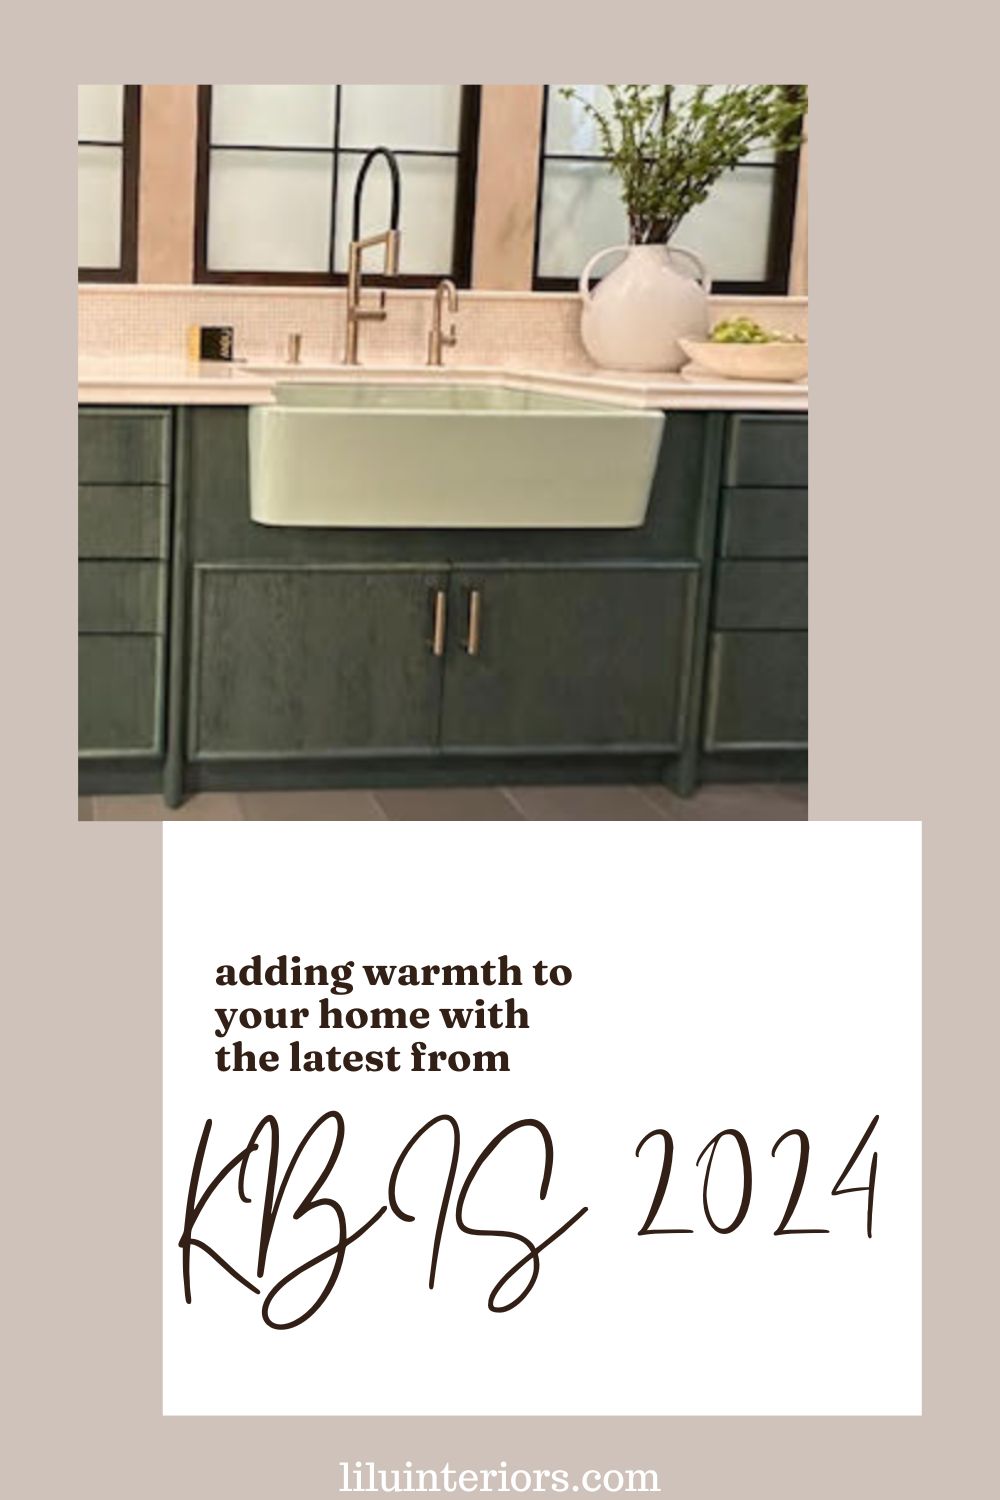 How to create a warm ambiance in your kitchen or bath space with the latest trends from KBIS 2024, by luxury interior designers Lilu Interiors